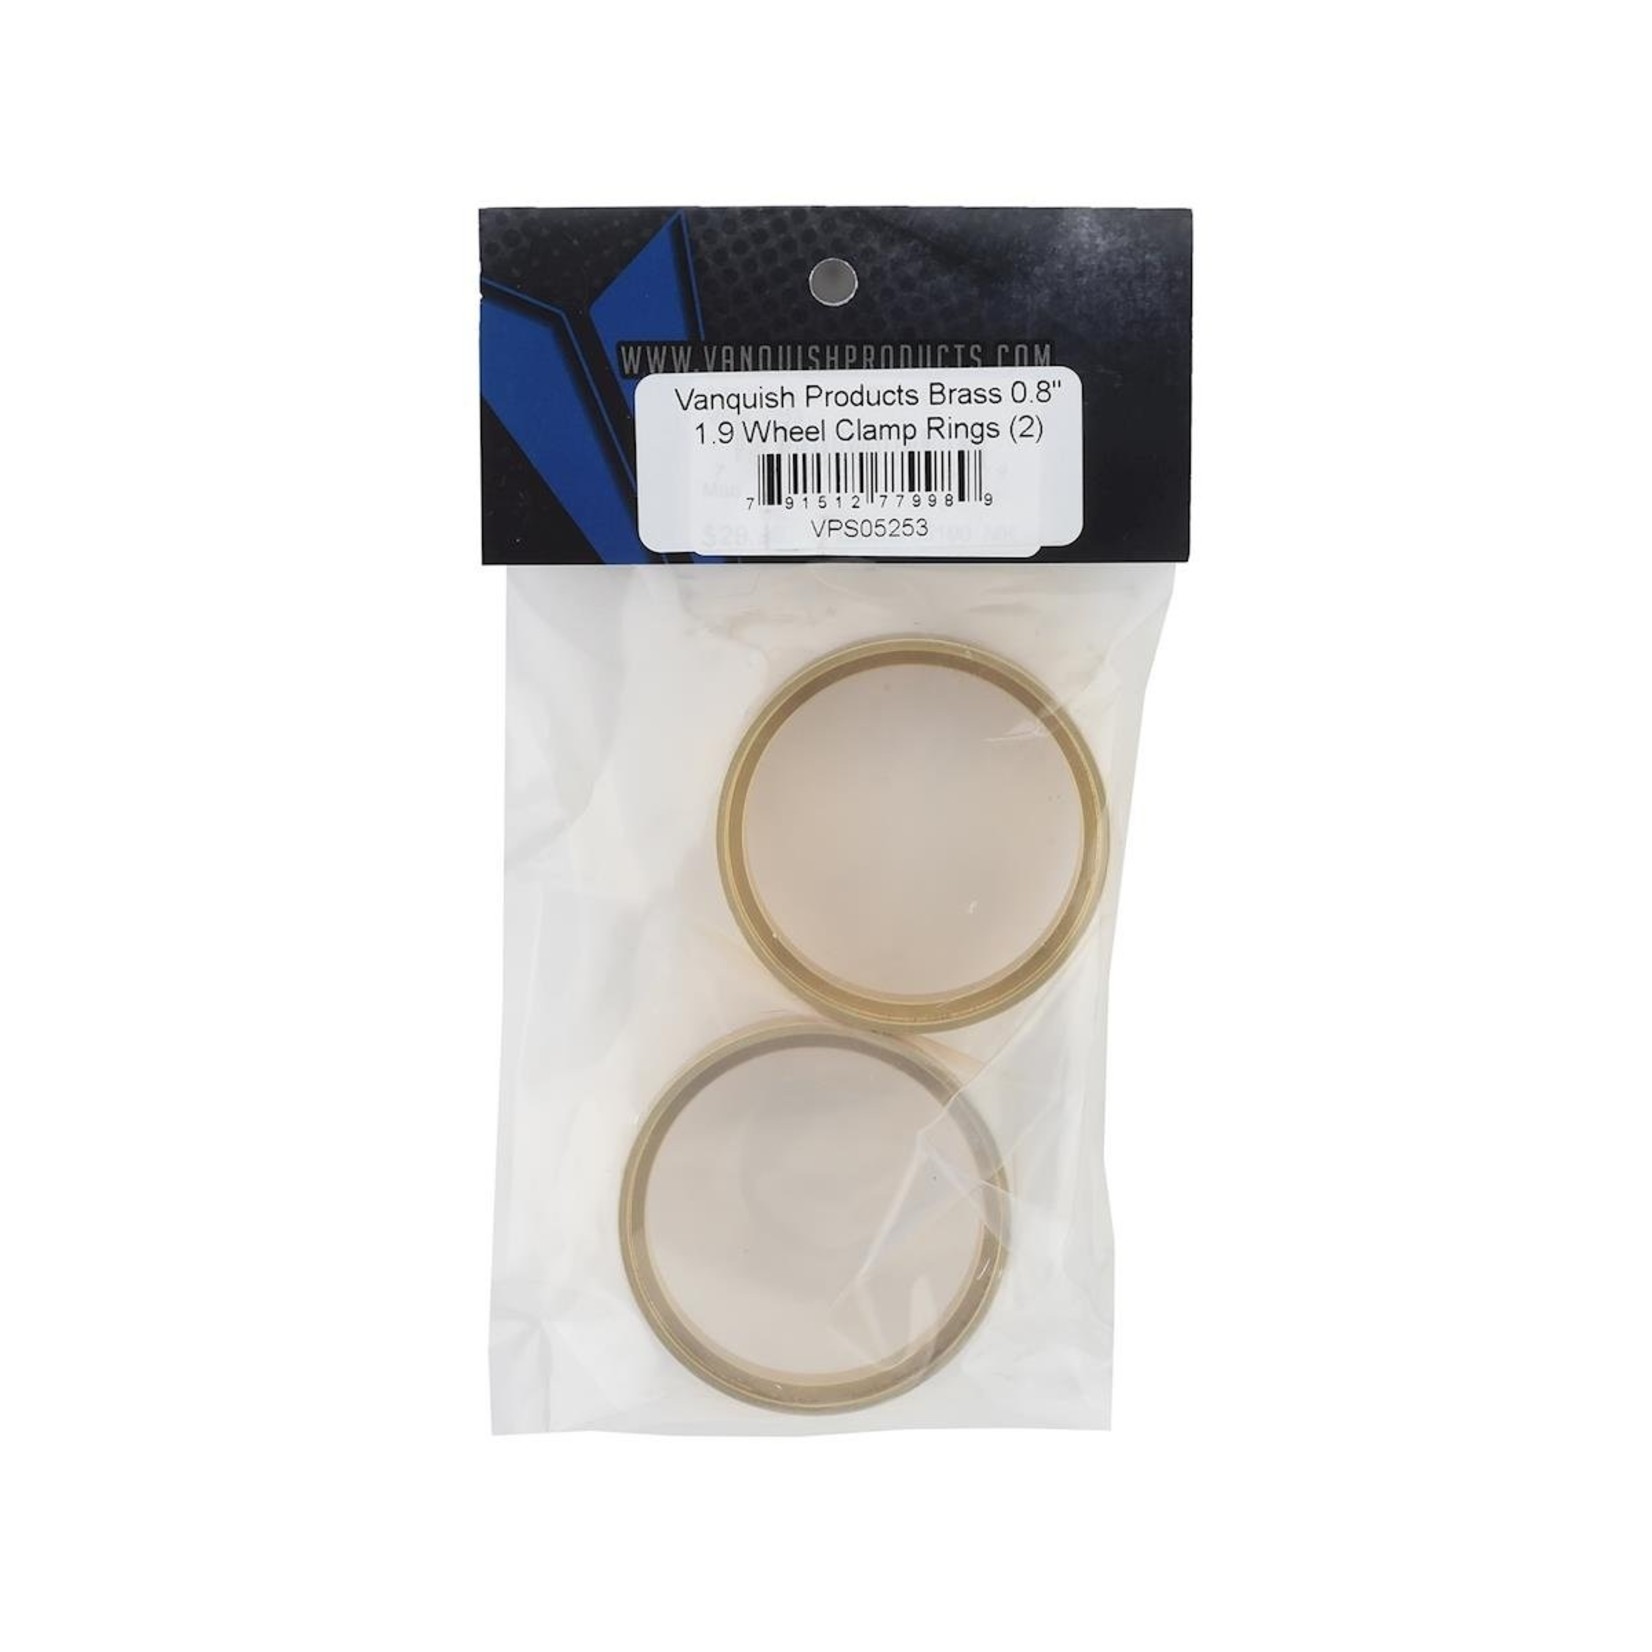 Vanquish Products VPS05253 Vanquish Products Brass 0.8" 1.9 Wheel Clamp Rings (2)